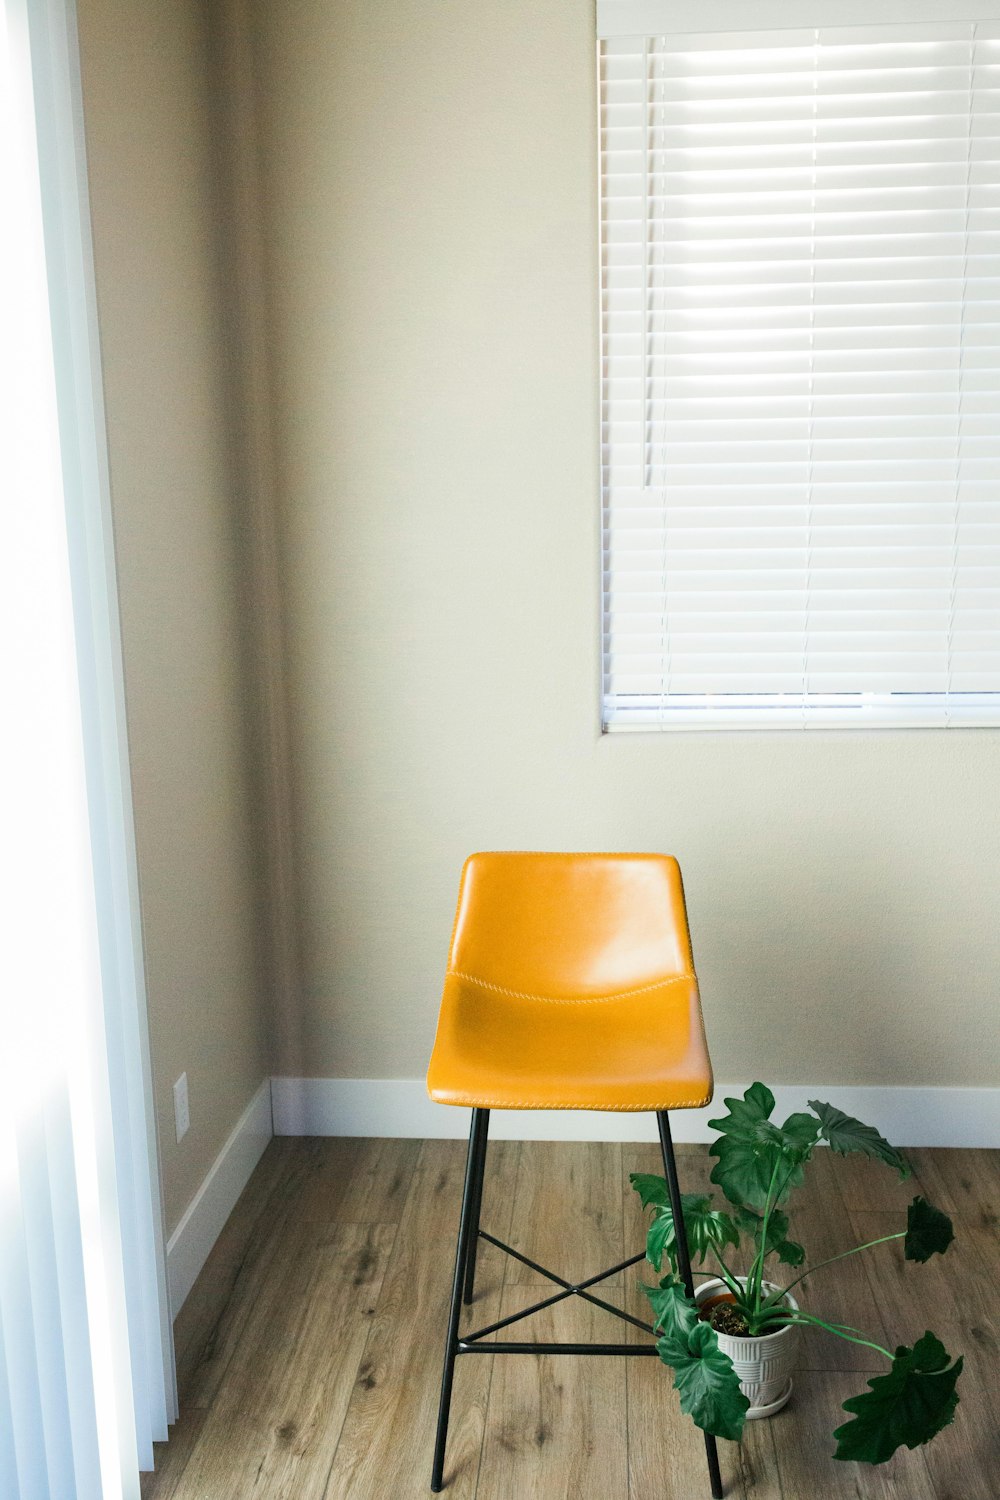 a yellow chair sitting in a room next to a window